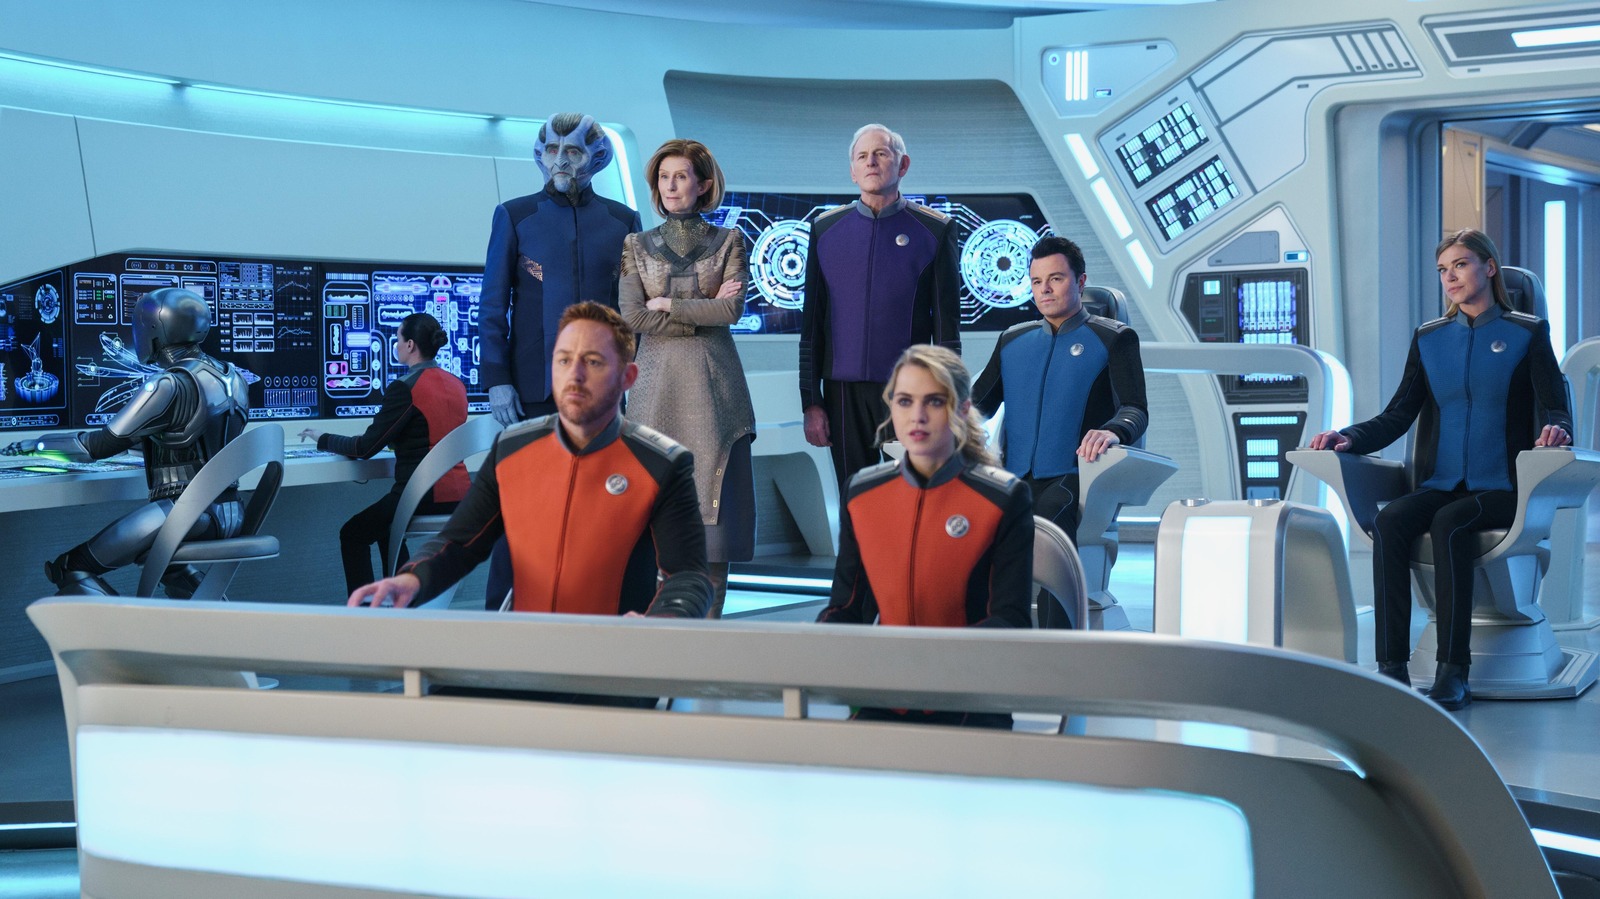 #Here’s When You Can Stream The Orville On Disney+